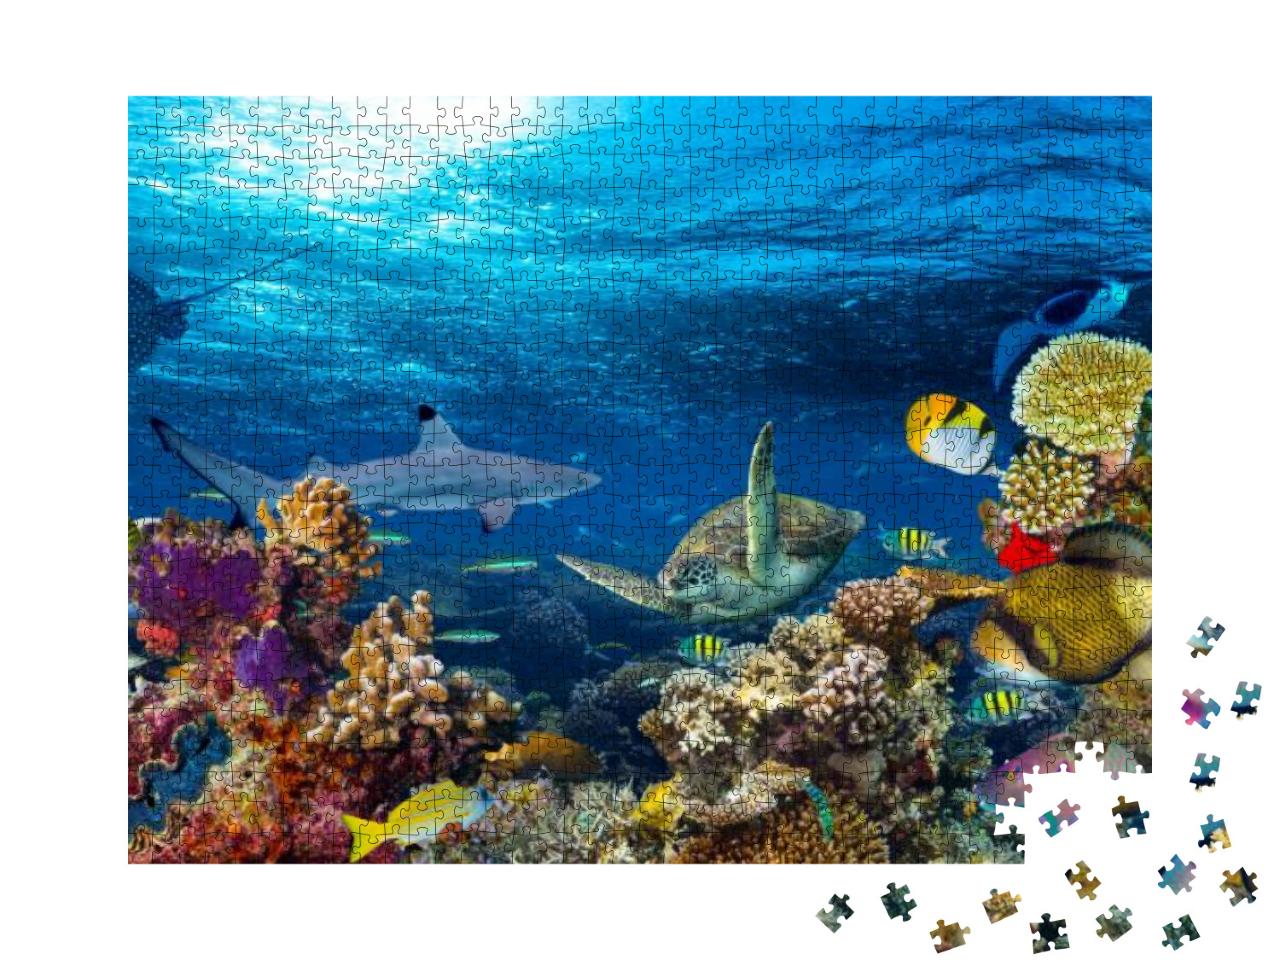 Underwater Coral Reef Landscape 16to9 Background in the D... Jigsaw Puzzle with 1000 pieces